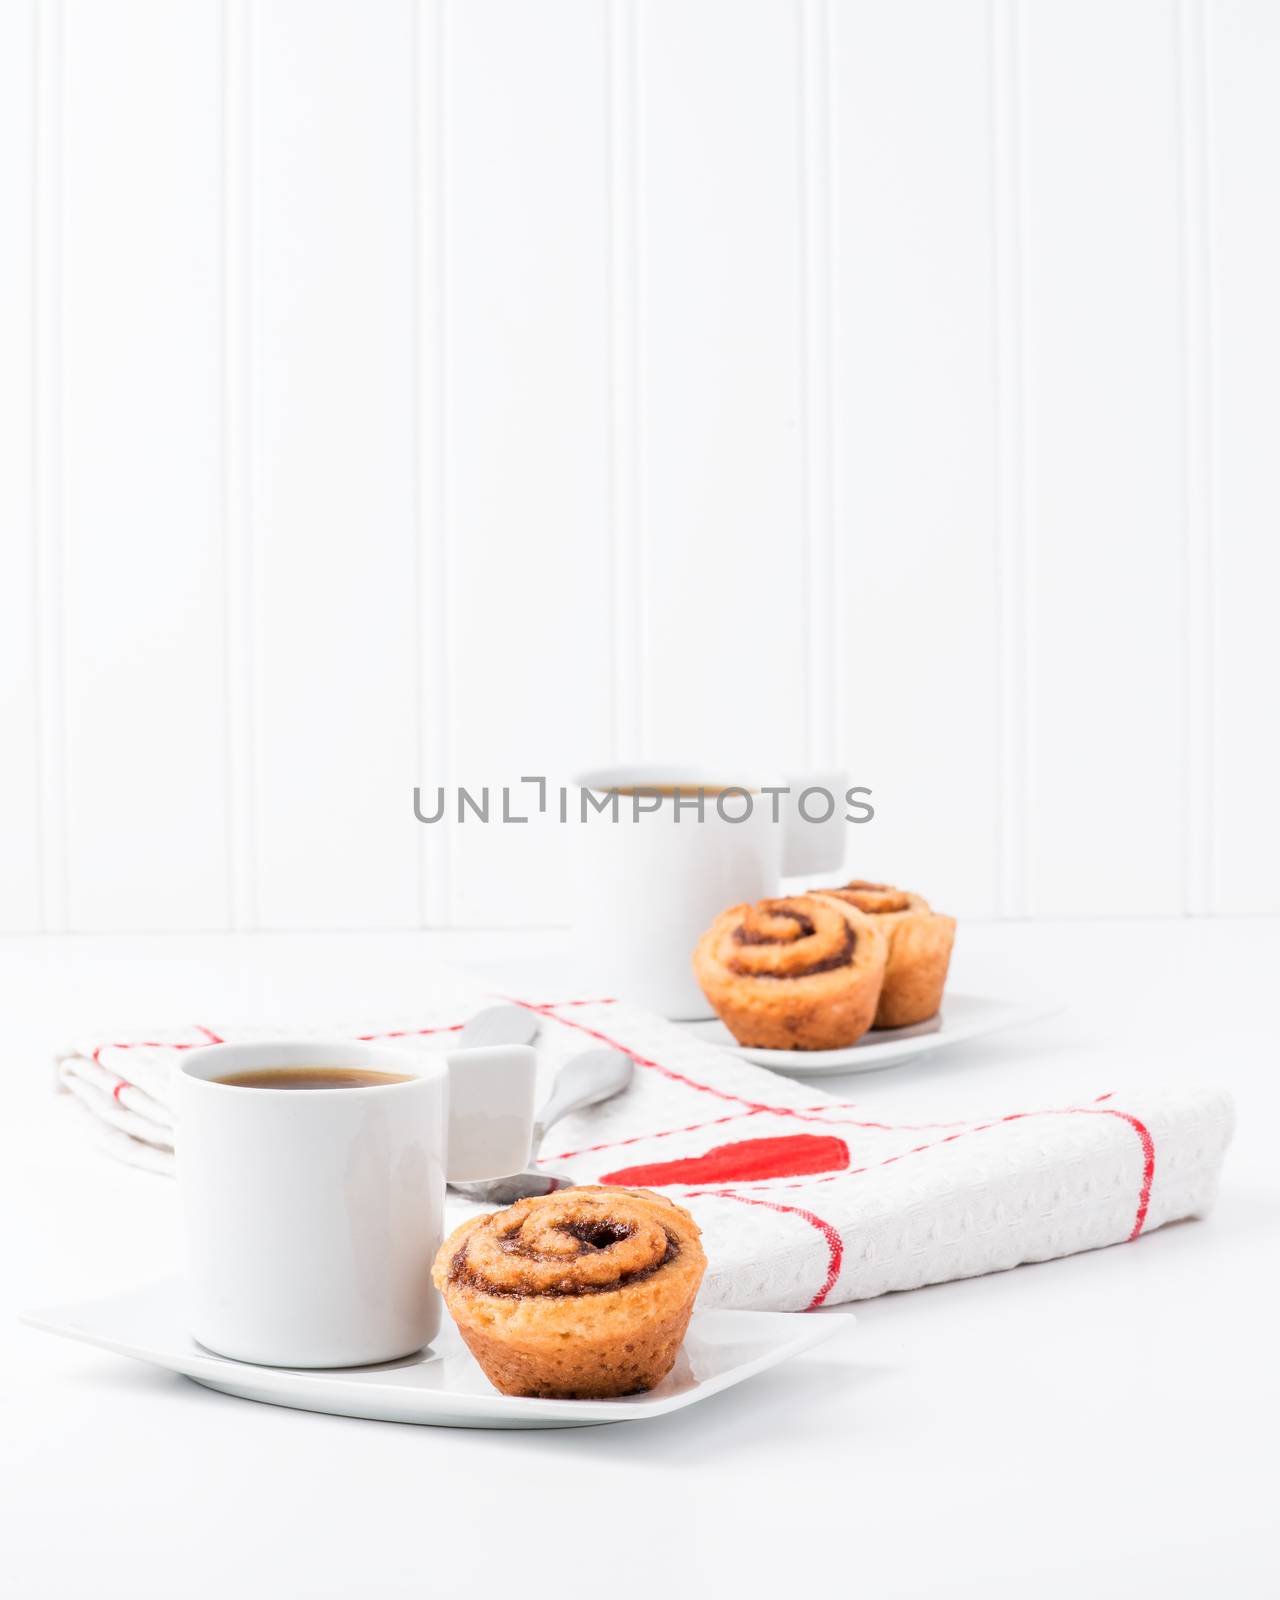 Fresh baked cinnamon rolls served with coffee.